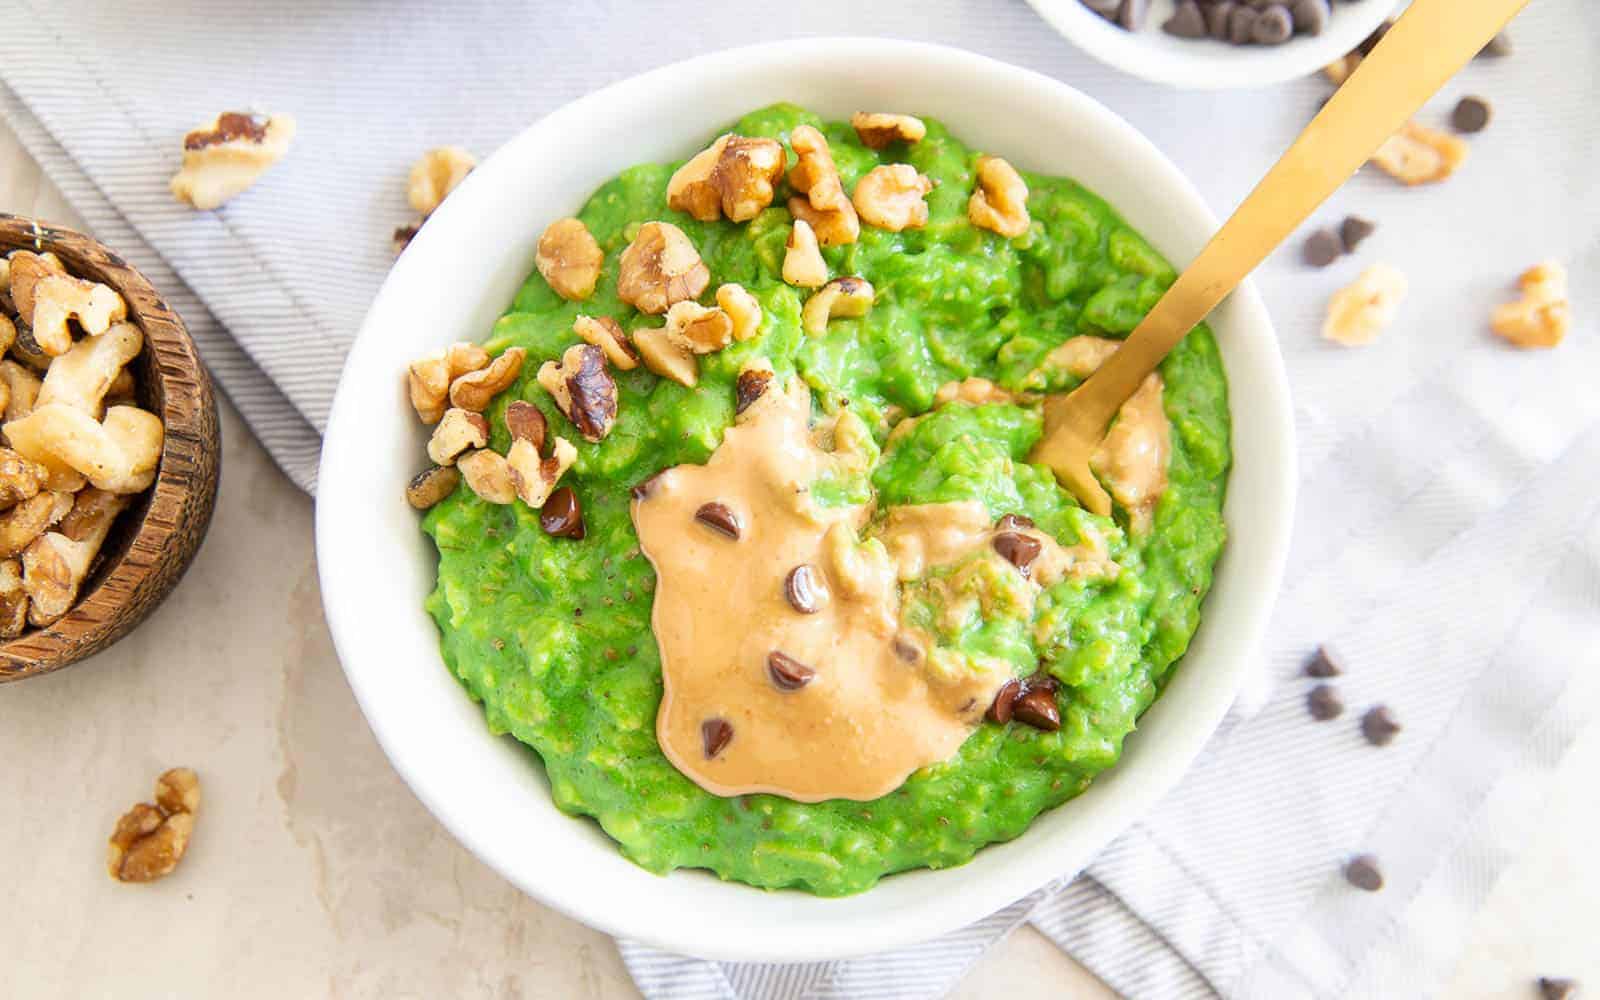 <p>Green oatmeal is a clever way to incorporate veggies into your breakfast. Blending spinach with oats, bananas, and milk creates a healthy and energizing start to the day. This recipe cleverly masks the taste of spinach, making it a smart choice for a nutritious morning meal.<br><strong>Get the Recipe: </strong><a href="https://www.runningtothekitchen.com/green-oatmeal/?utm_source=msn&utm_medium=page&utm_campaign=msn">Green Oatmeal</a></p>